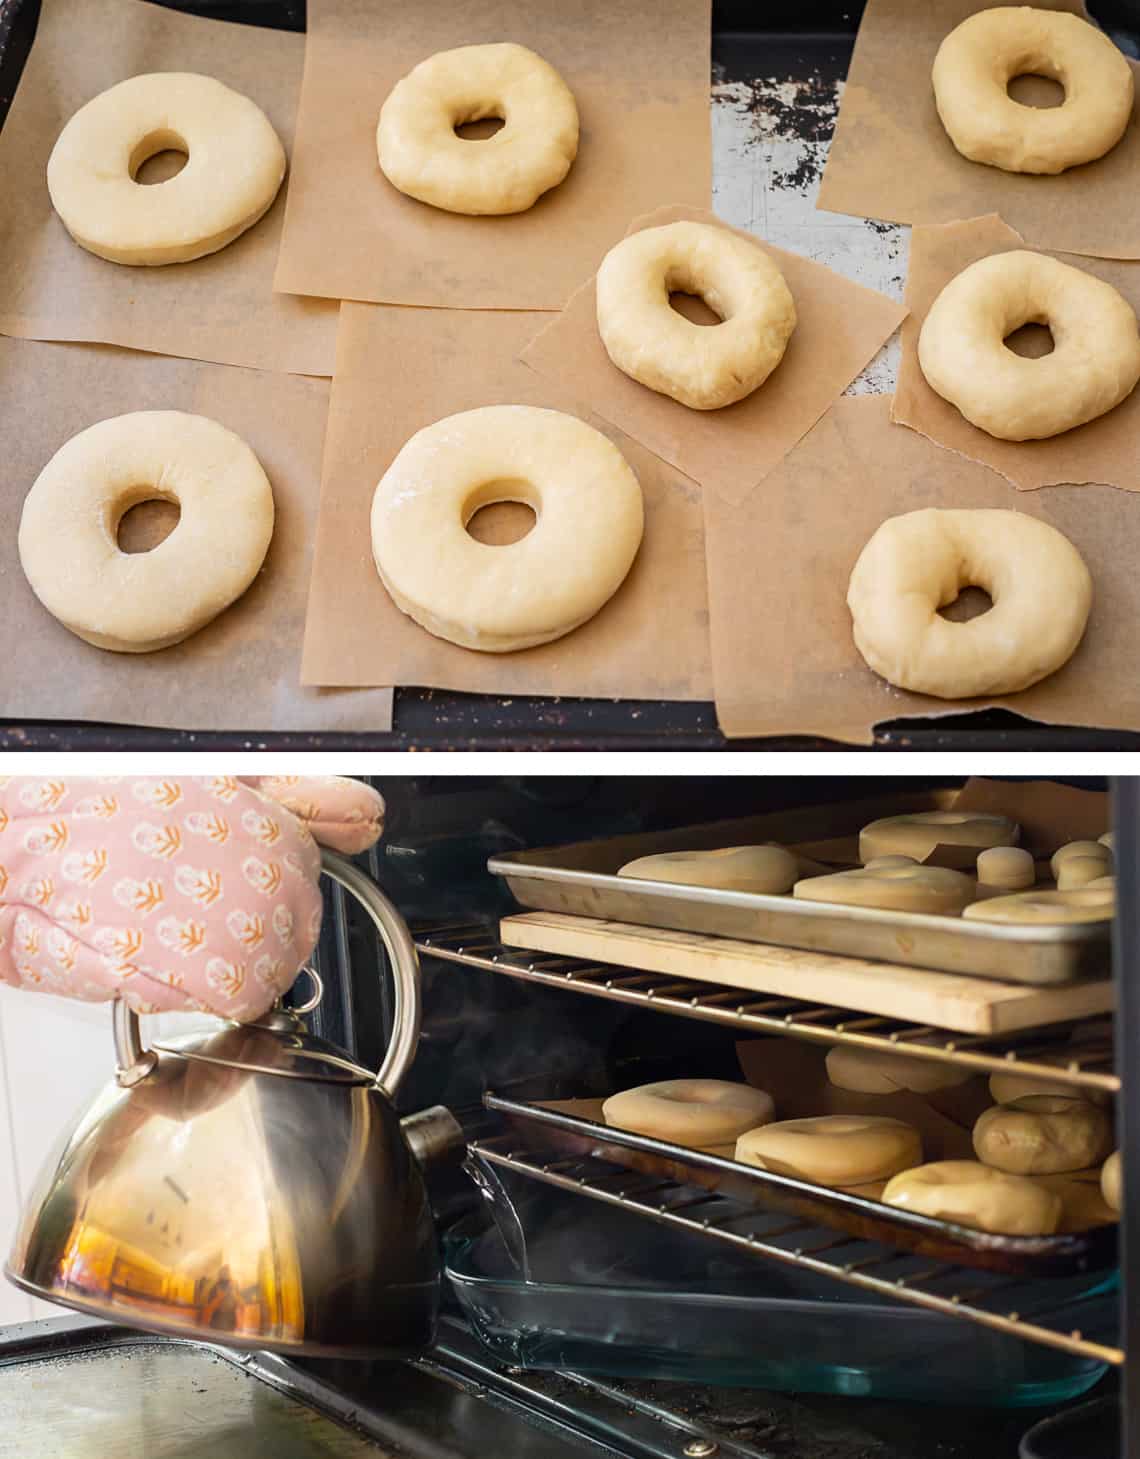 cut and hand shaped donuts on a pan and adding water the oven with shaped donuts.